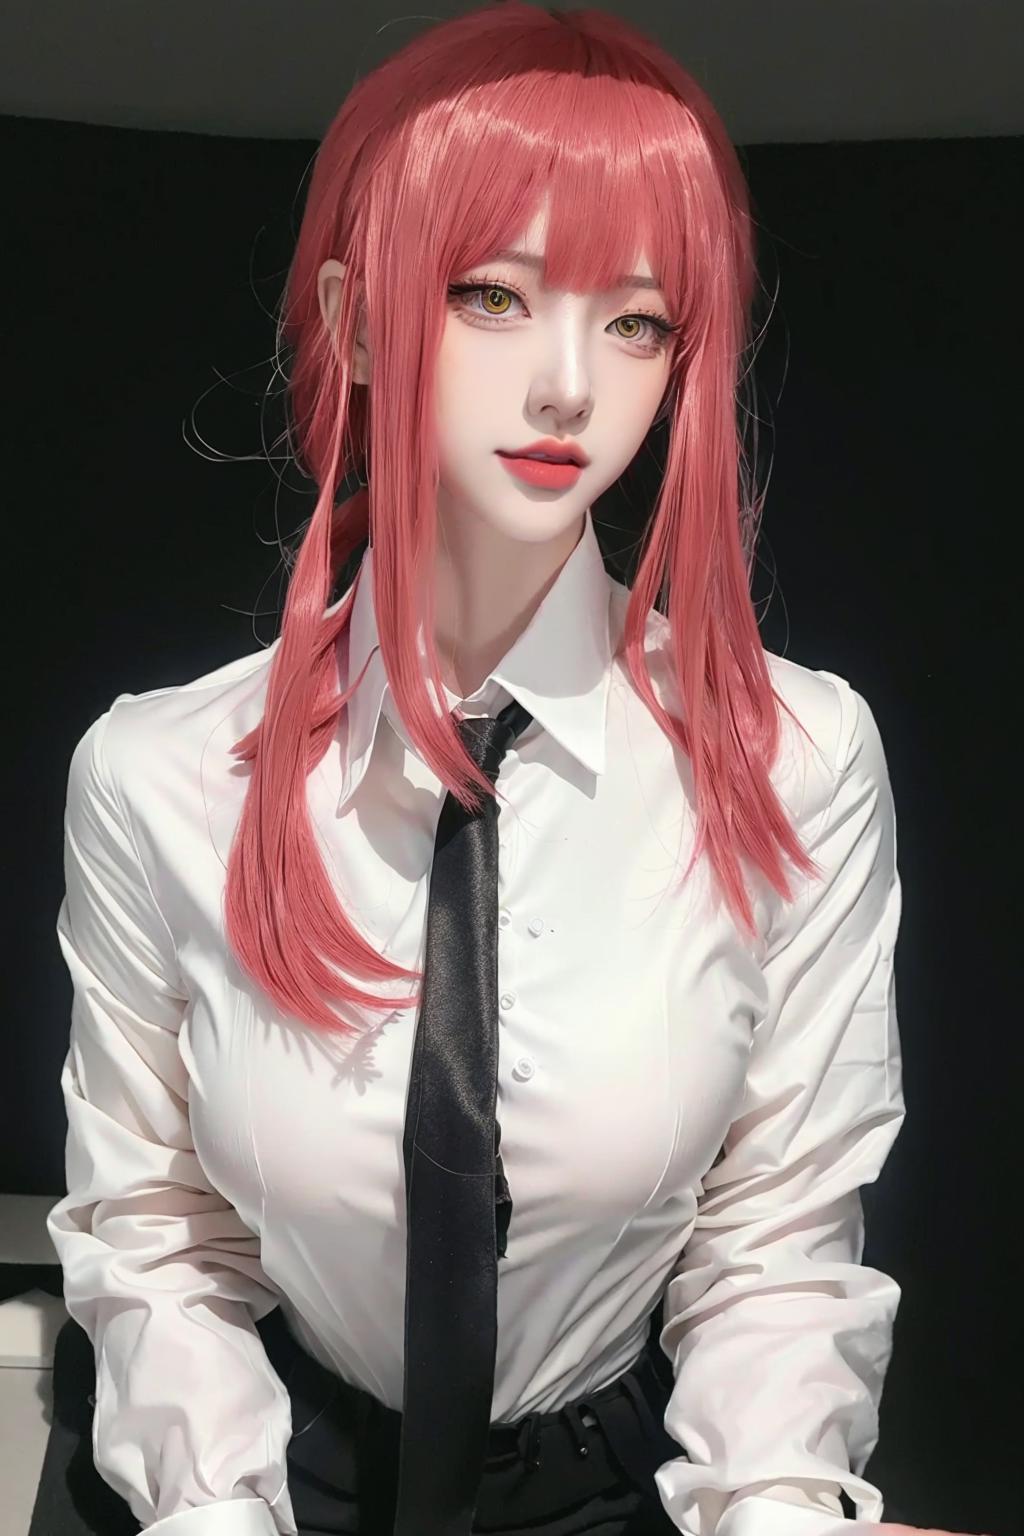 AI model image by jappww